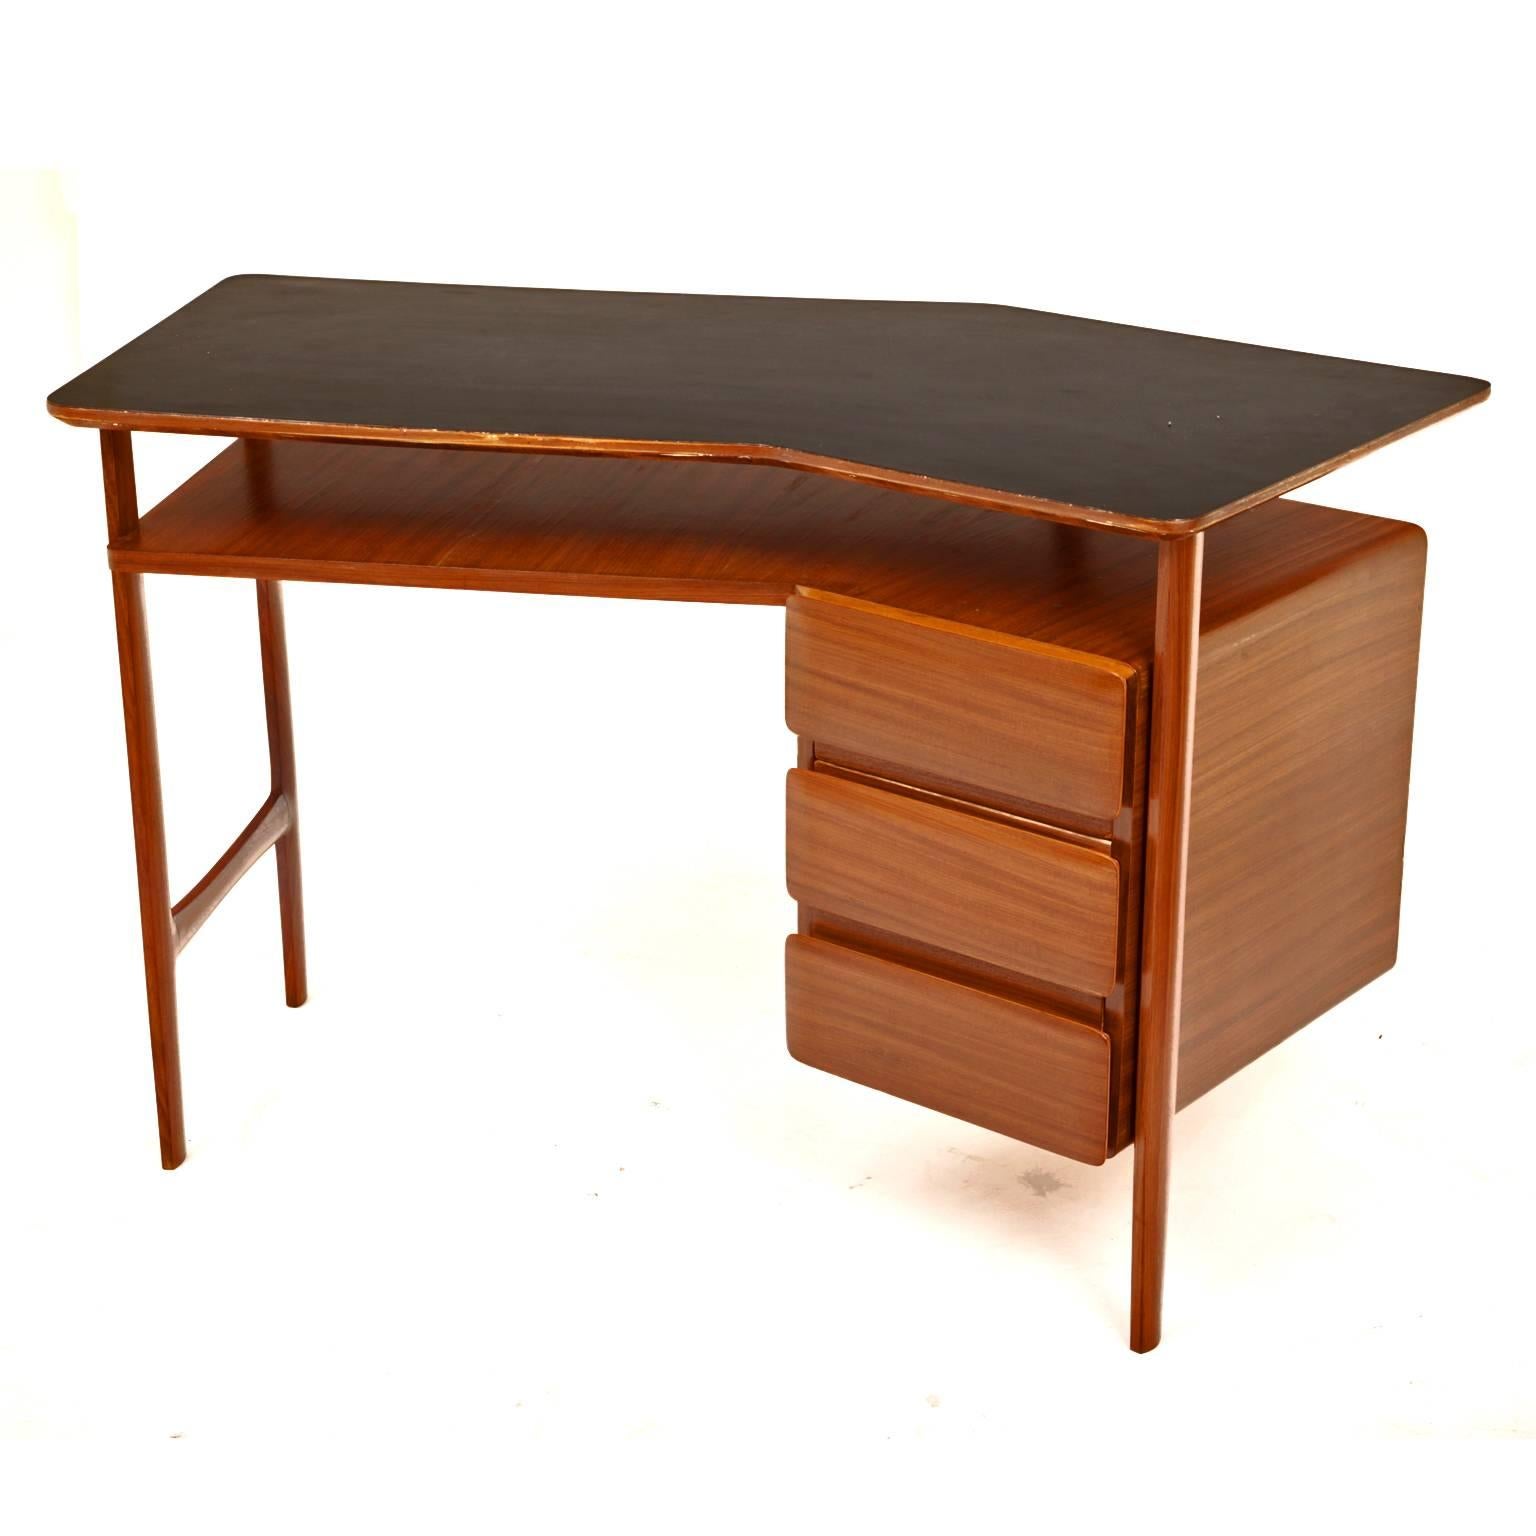 Writing desk with three drawers and a slightly curved tabletop.